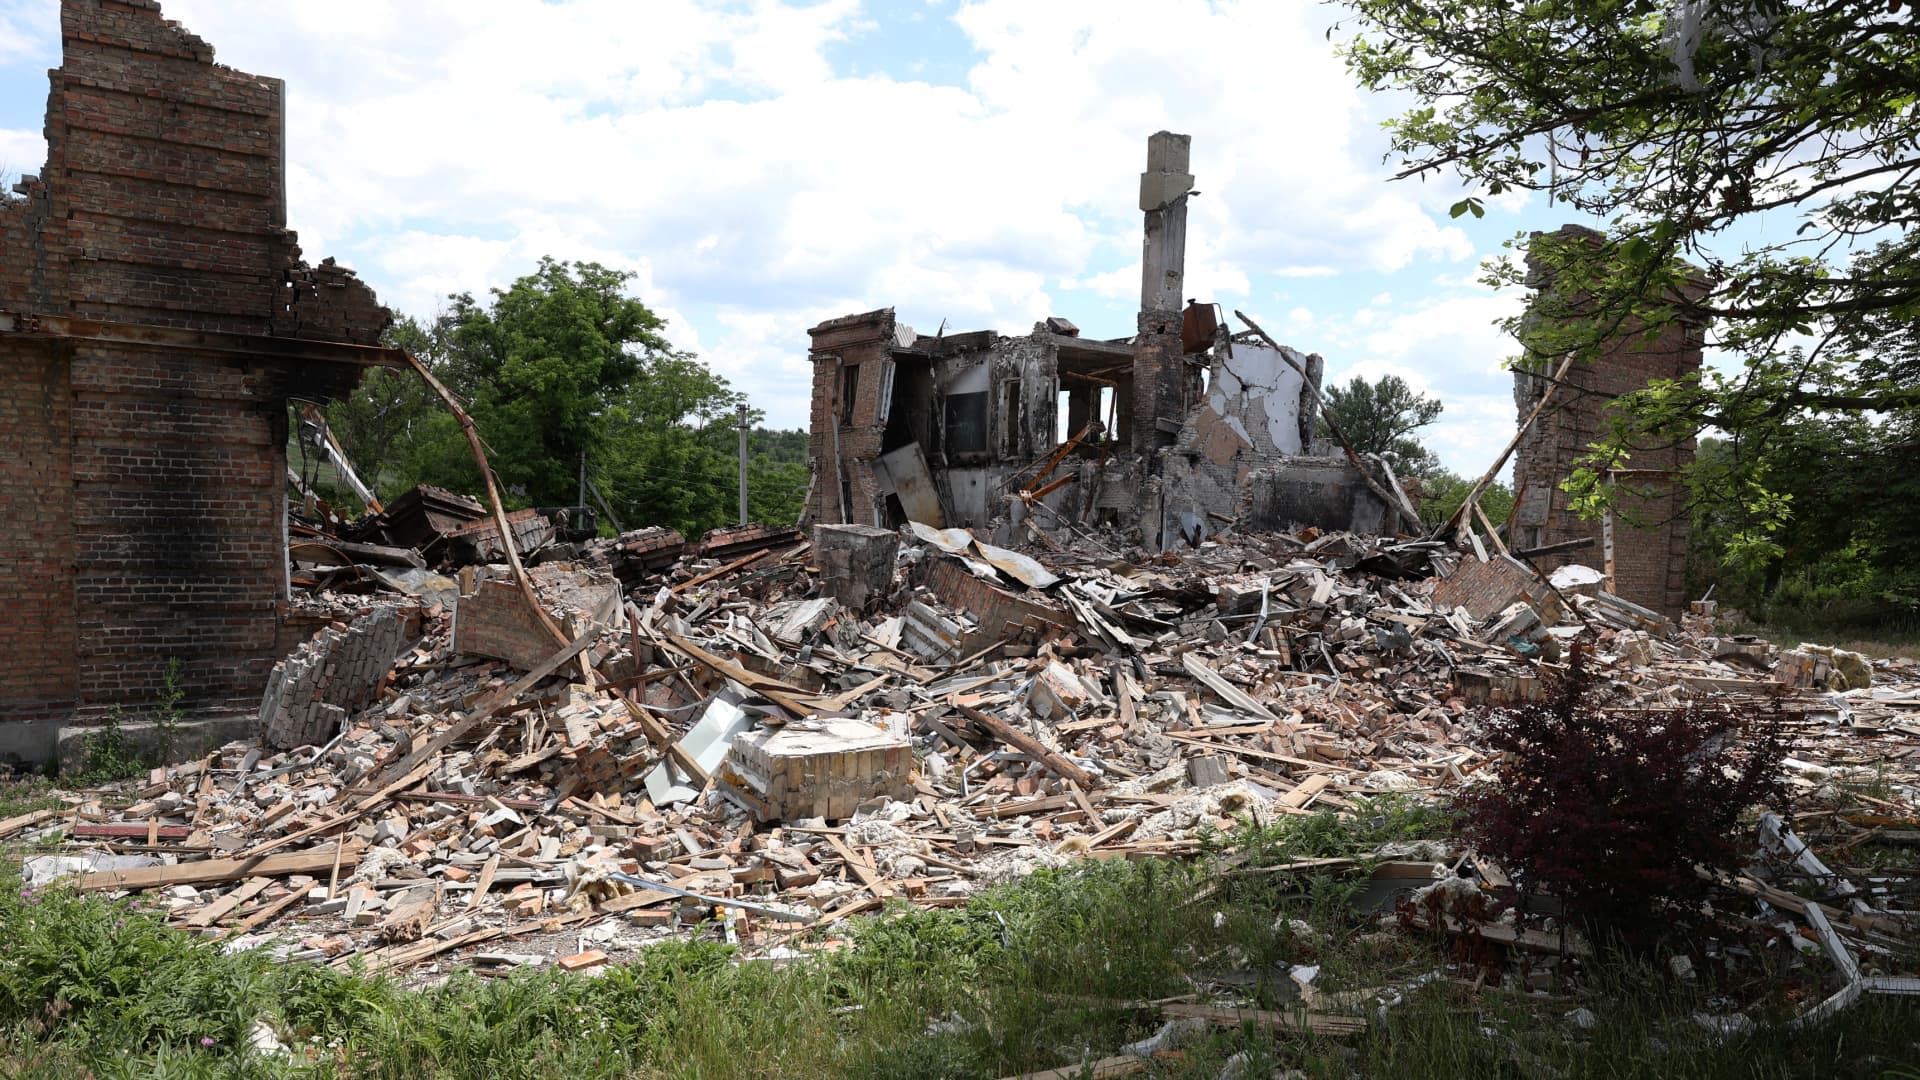 A photo taken on June 17, 2022, shows a destroyed school in the village of Bilohorivka not far from Lysychansk in the Luhansk region which was seized by Russian forces in early July.